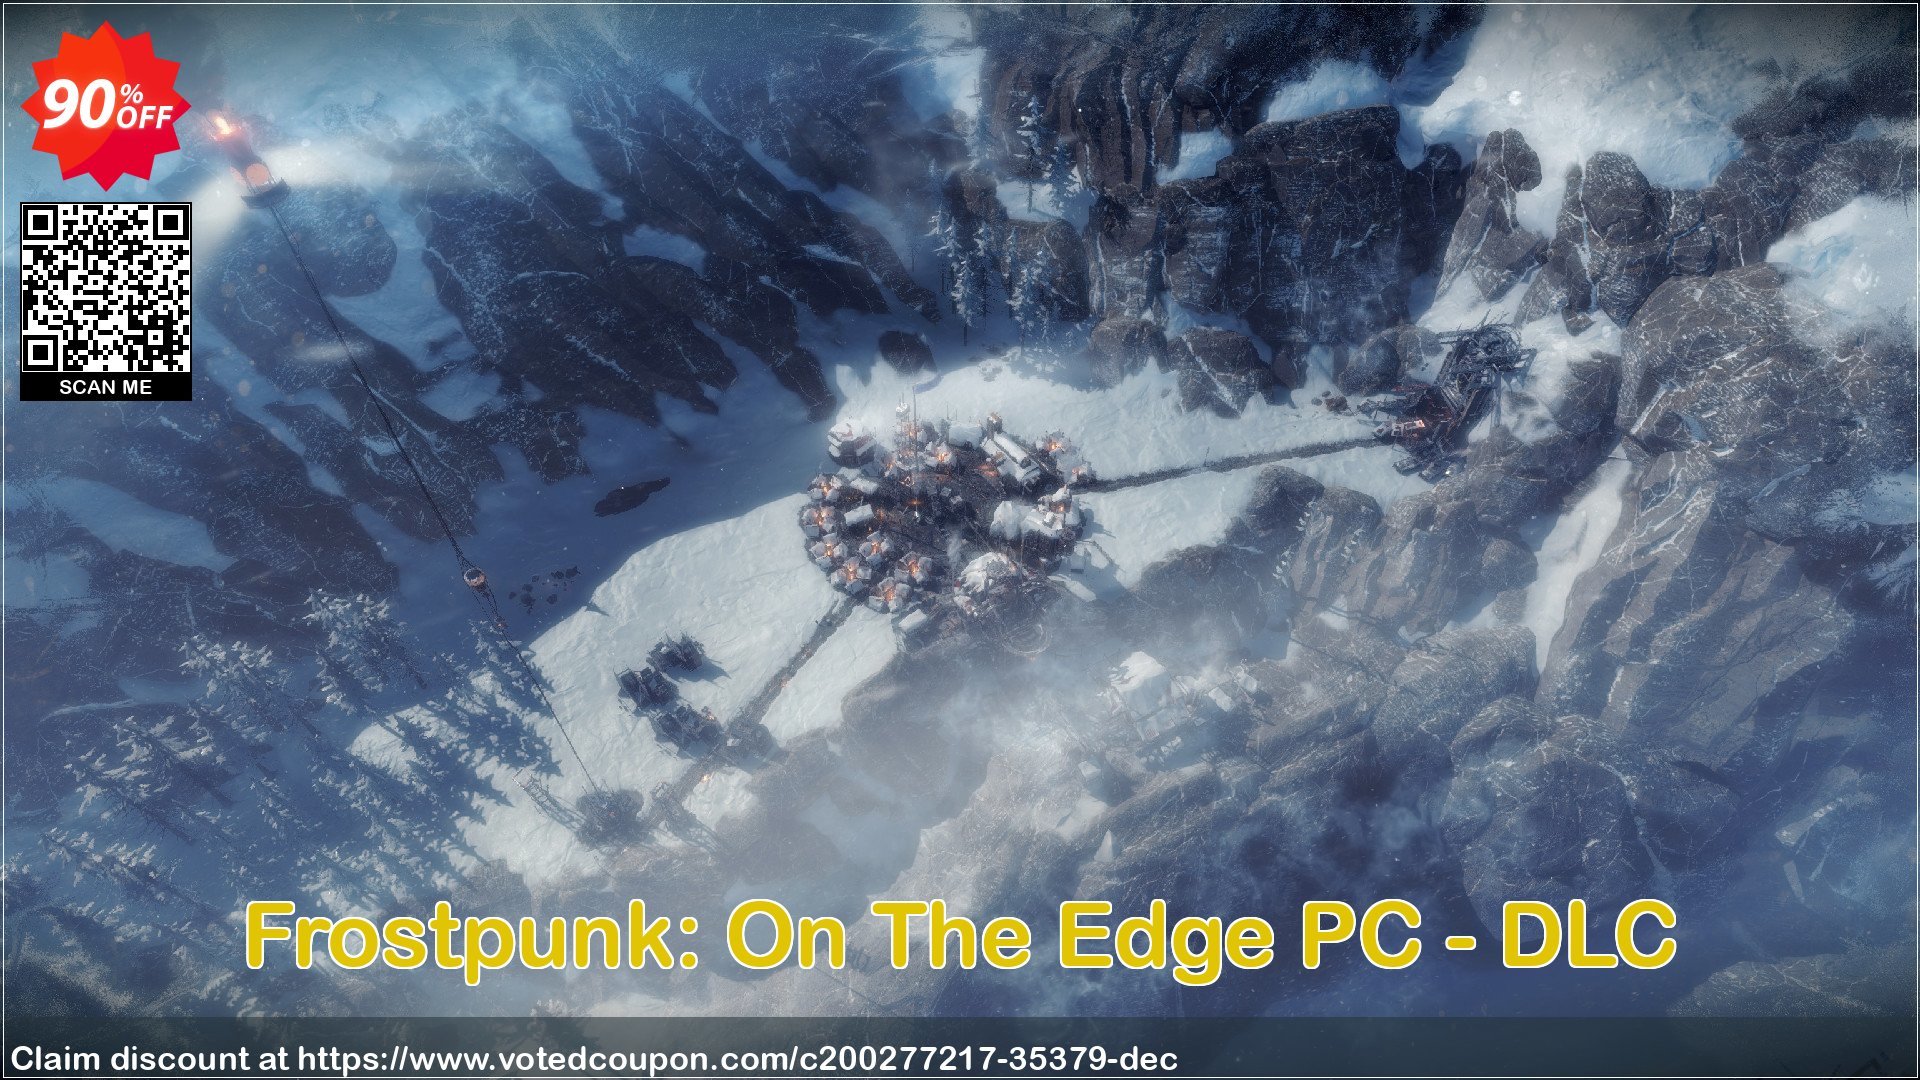 Frostpunk: On The Edge PC - DLC Coupon Code Apr 2024, 90% OFF - VotedCoupon